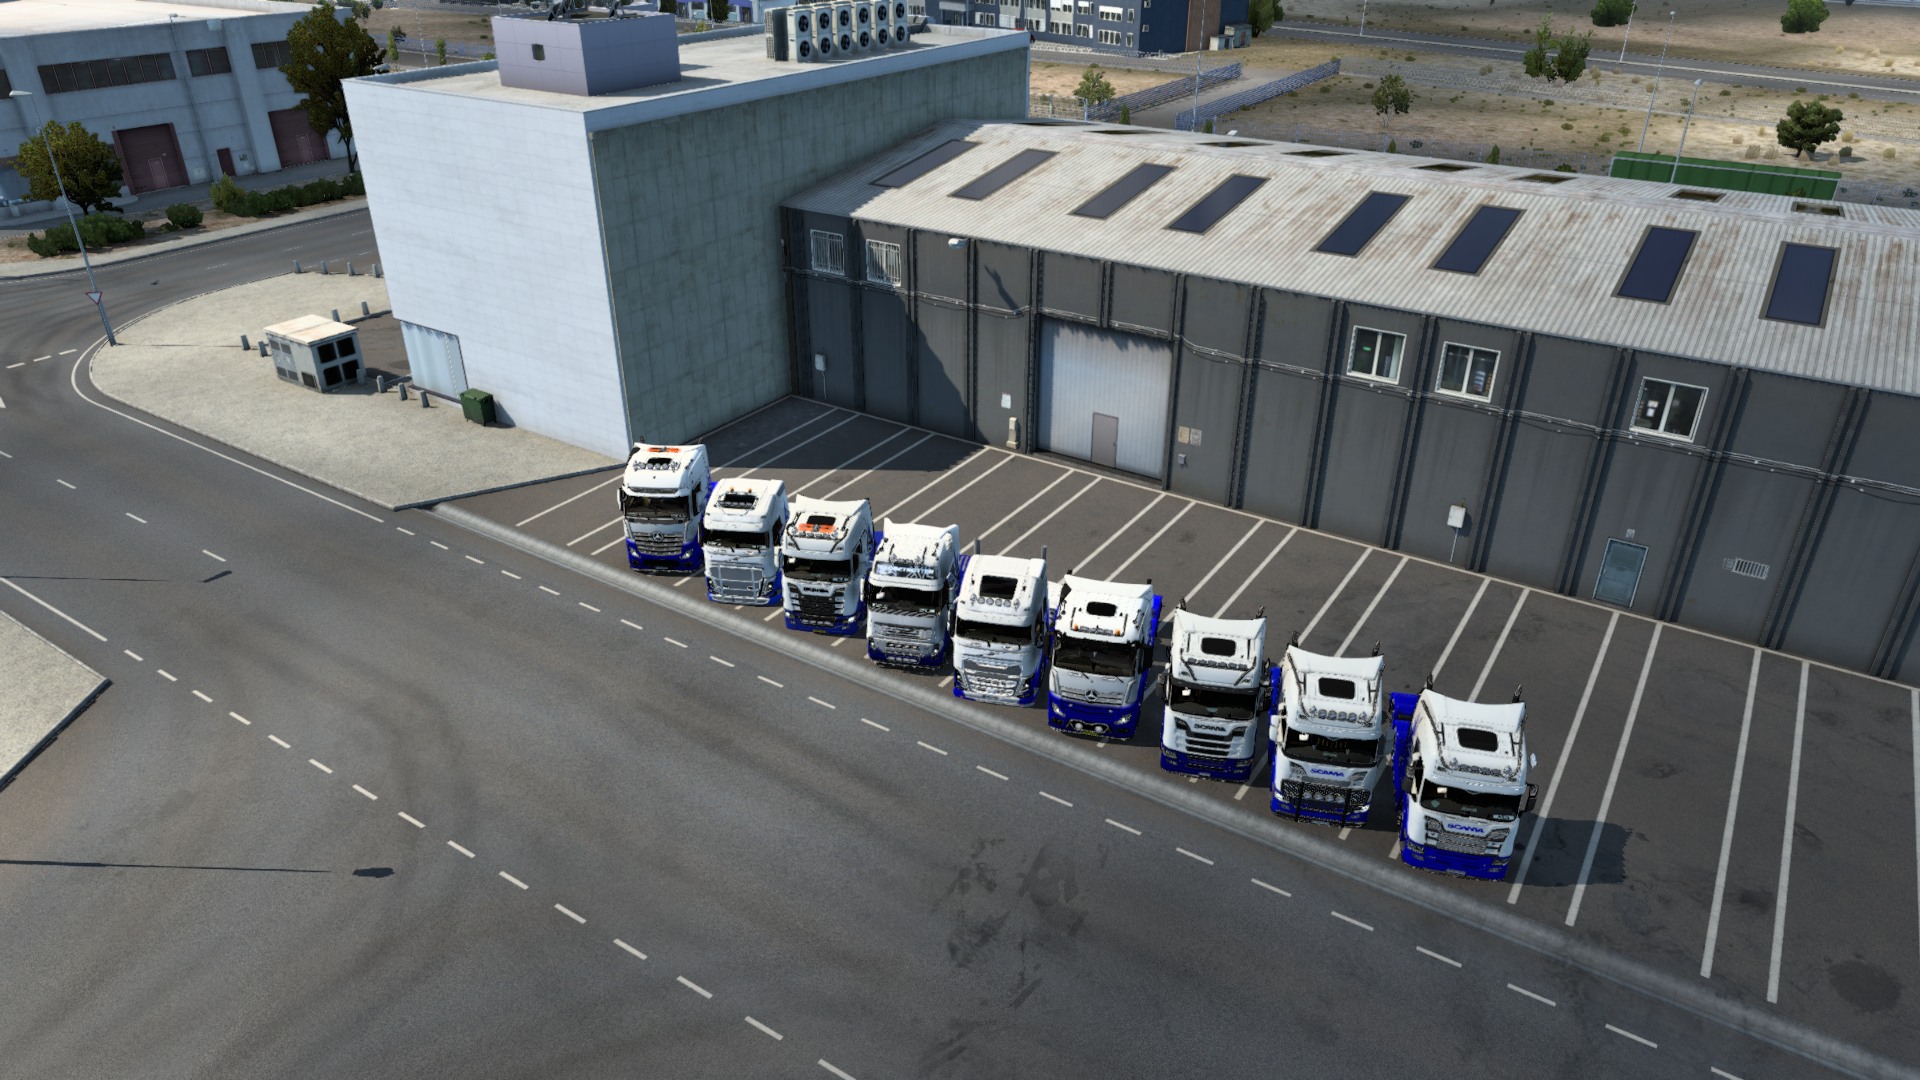 ets2_20220930_234614_00.png